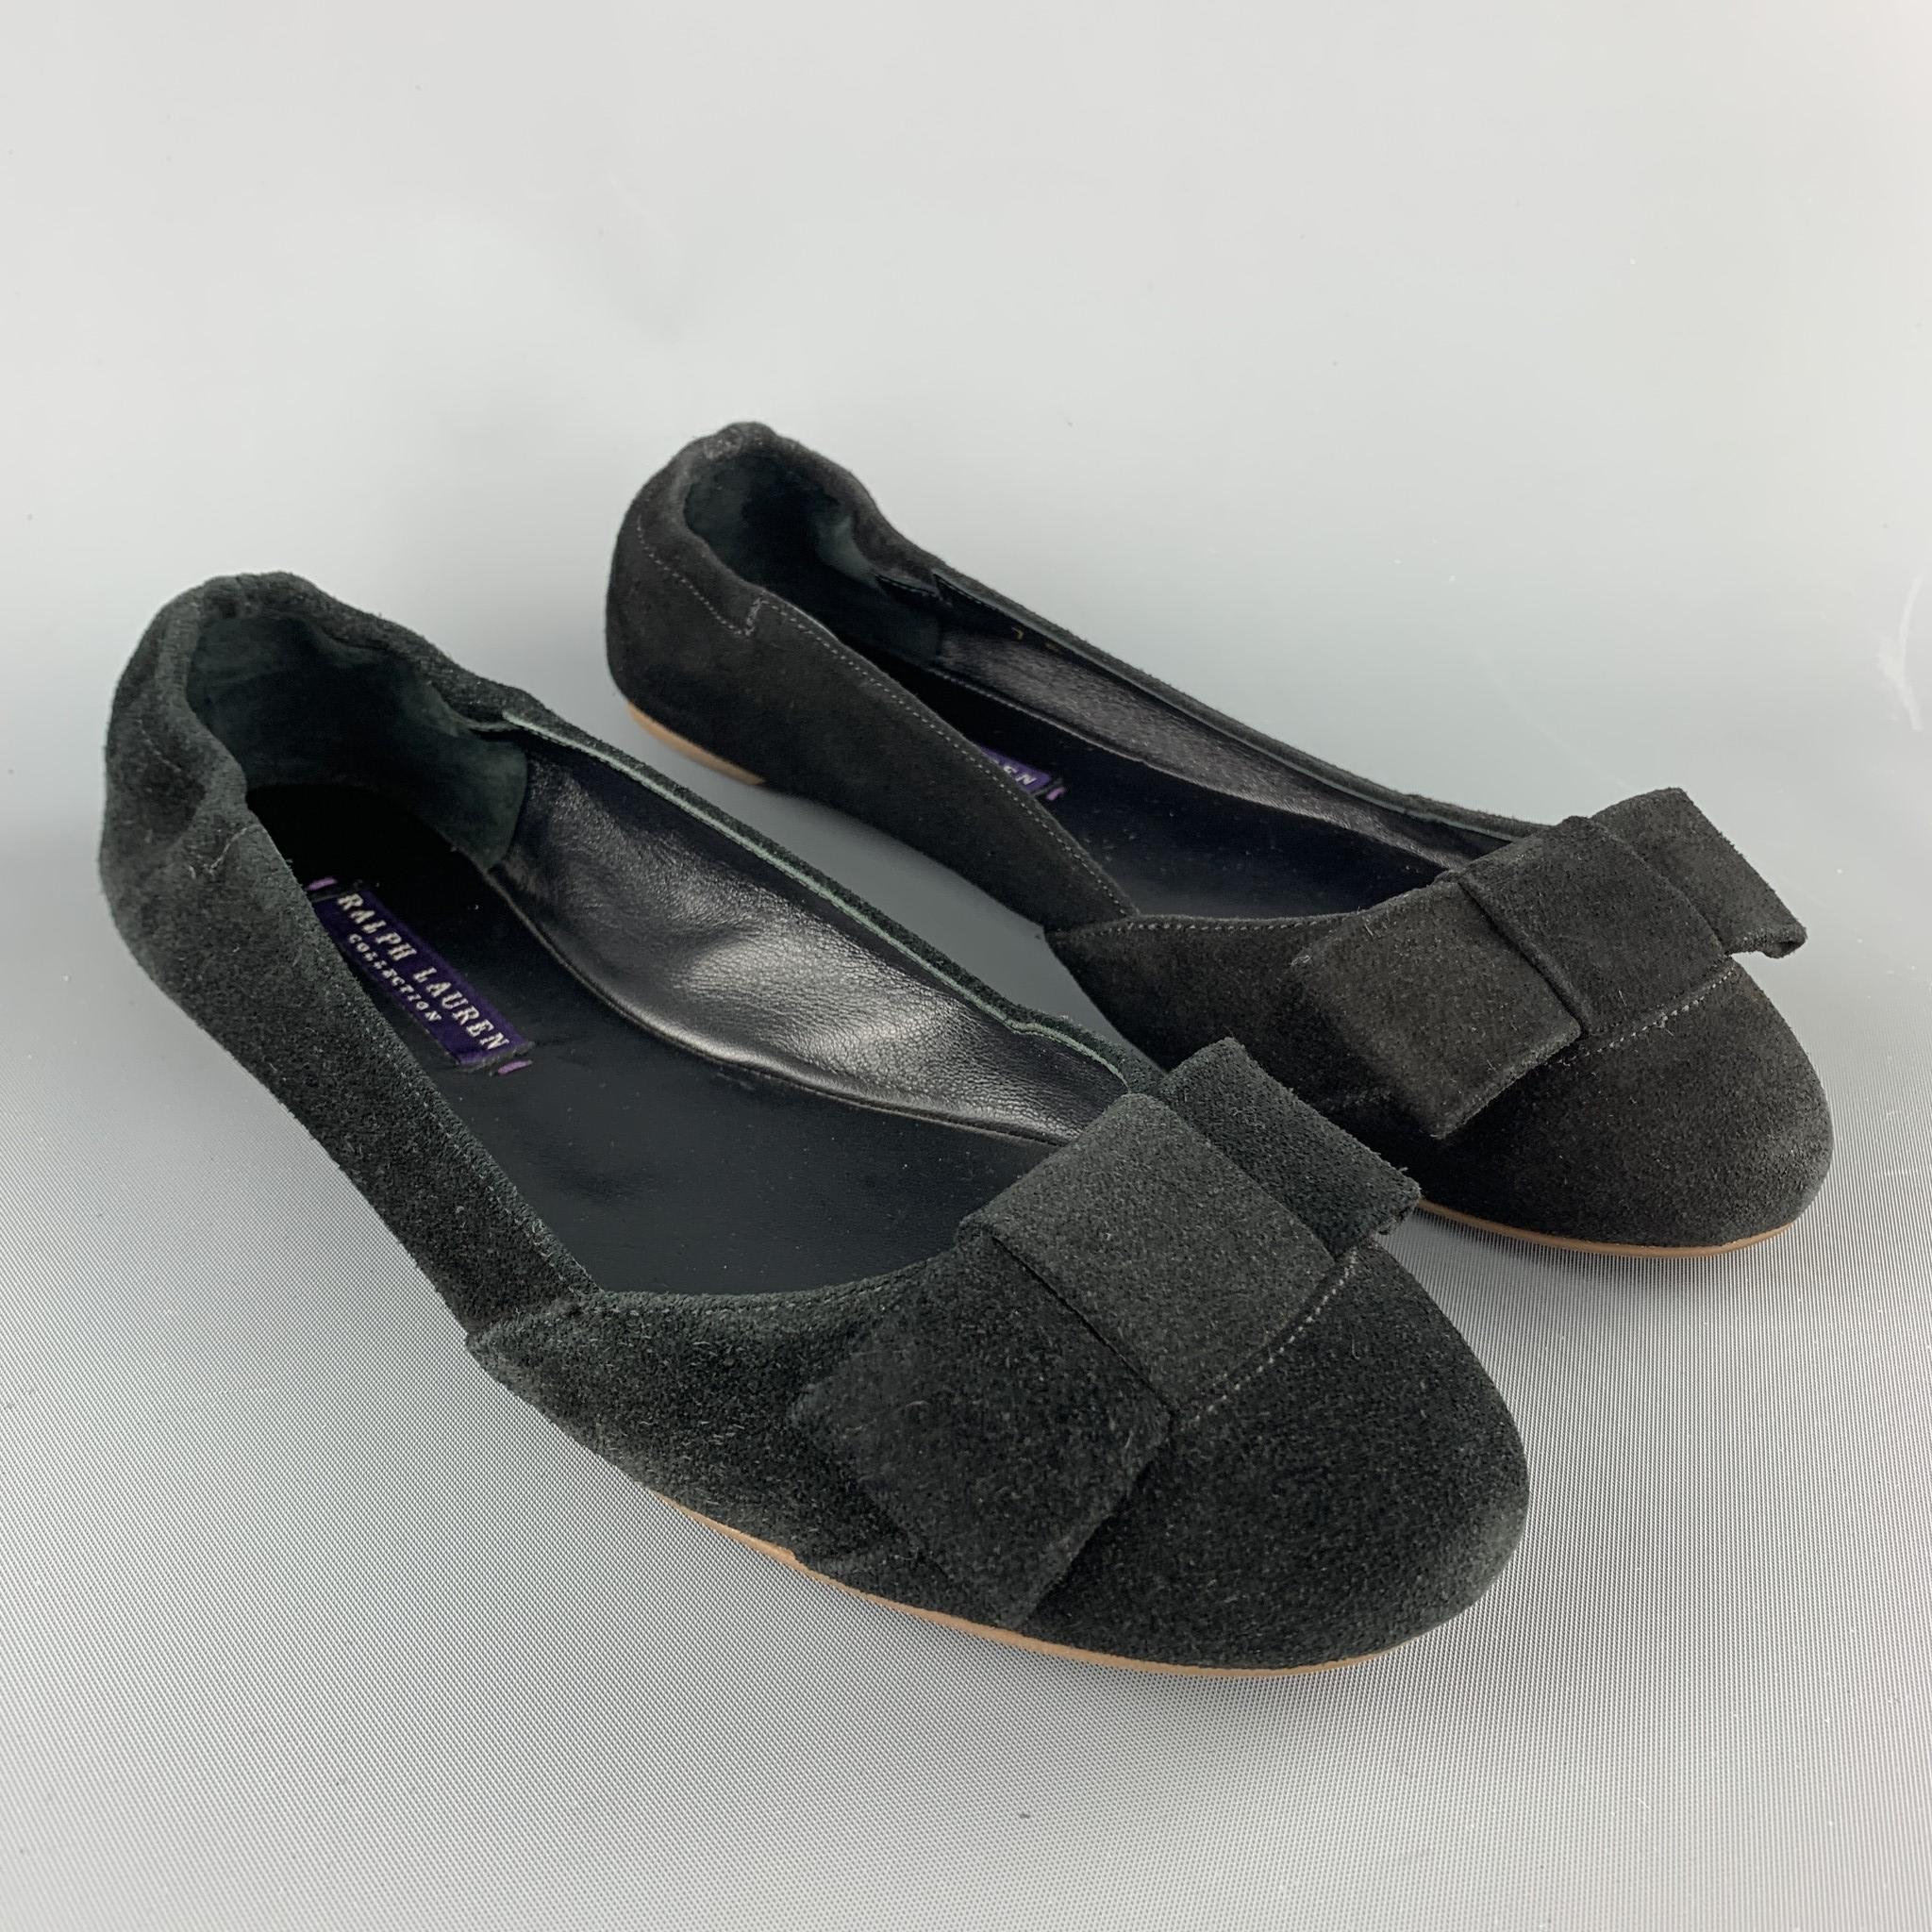 RALPH LAUREN COLLECTION flats come in black suede with a bow accent. Made in Spain.

Excellent Pre-Owned Condition.
Marked: US 7 B

Outsole: 10 x 3 in.